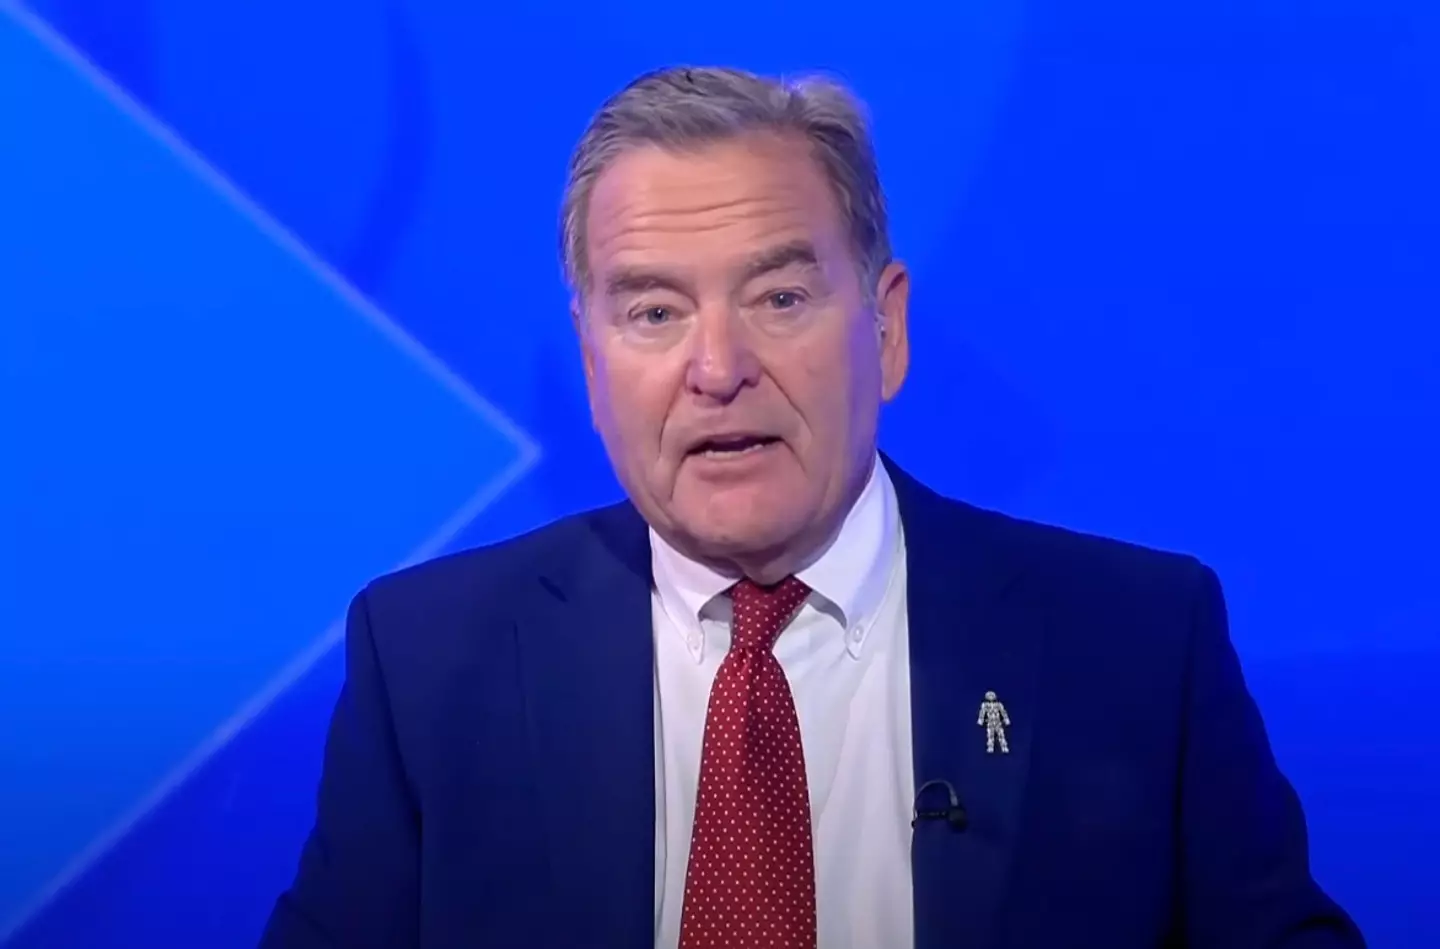 Jeff Stelling previously said in October 2021 he would quit the programme at the end of that season, but ultimately confirmed he would stay on.